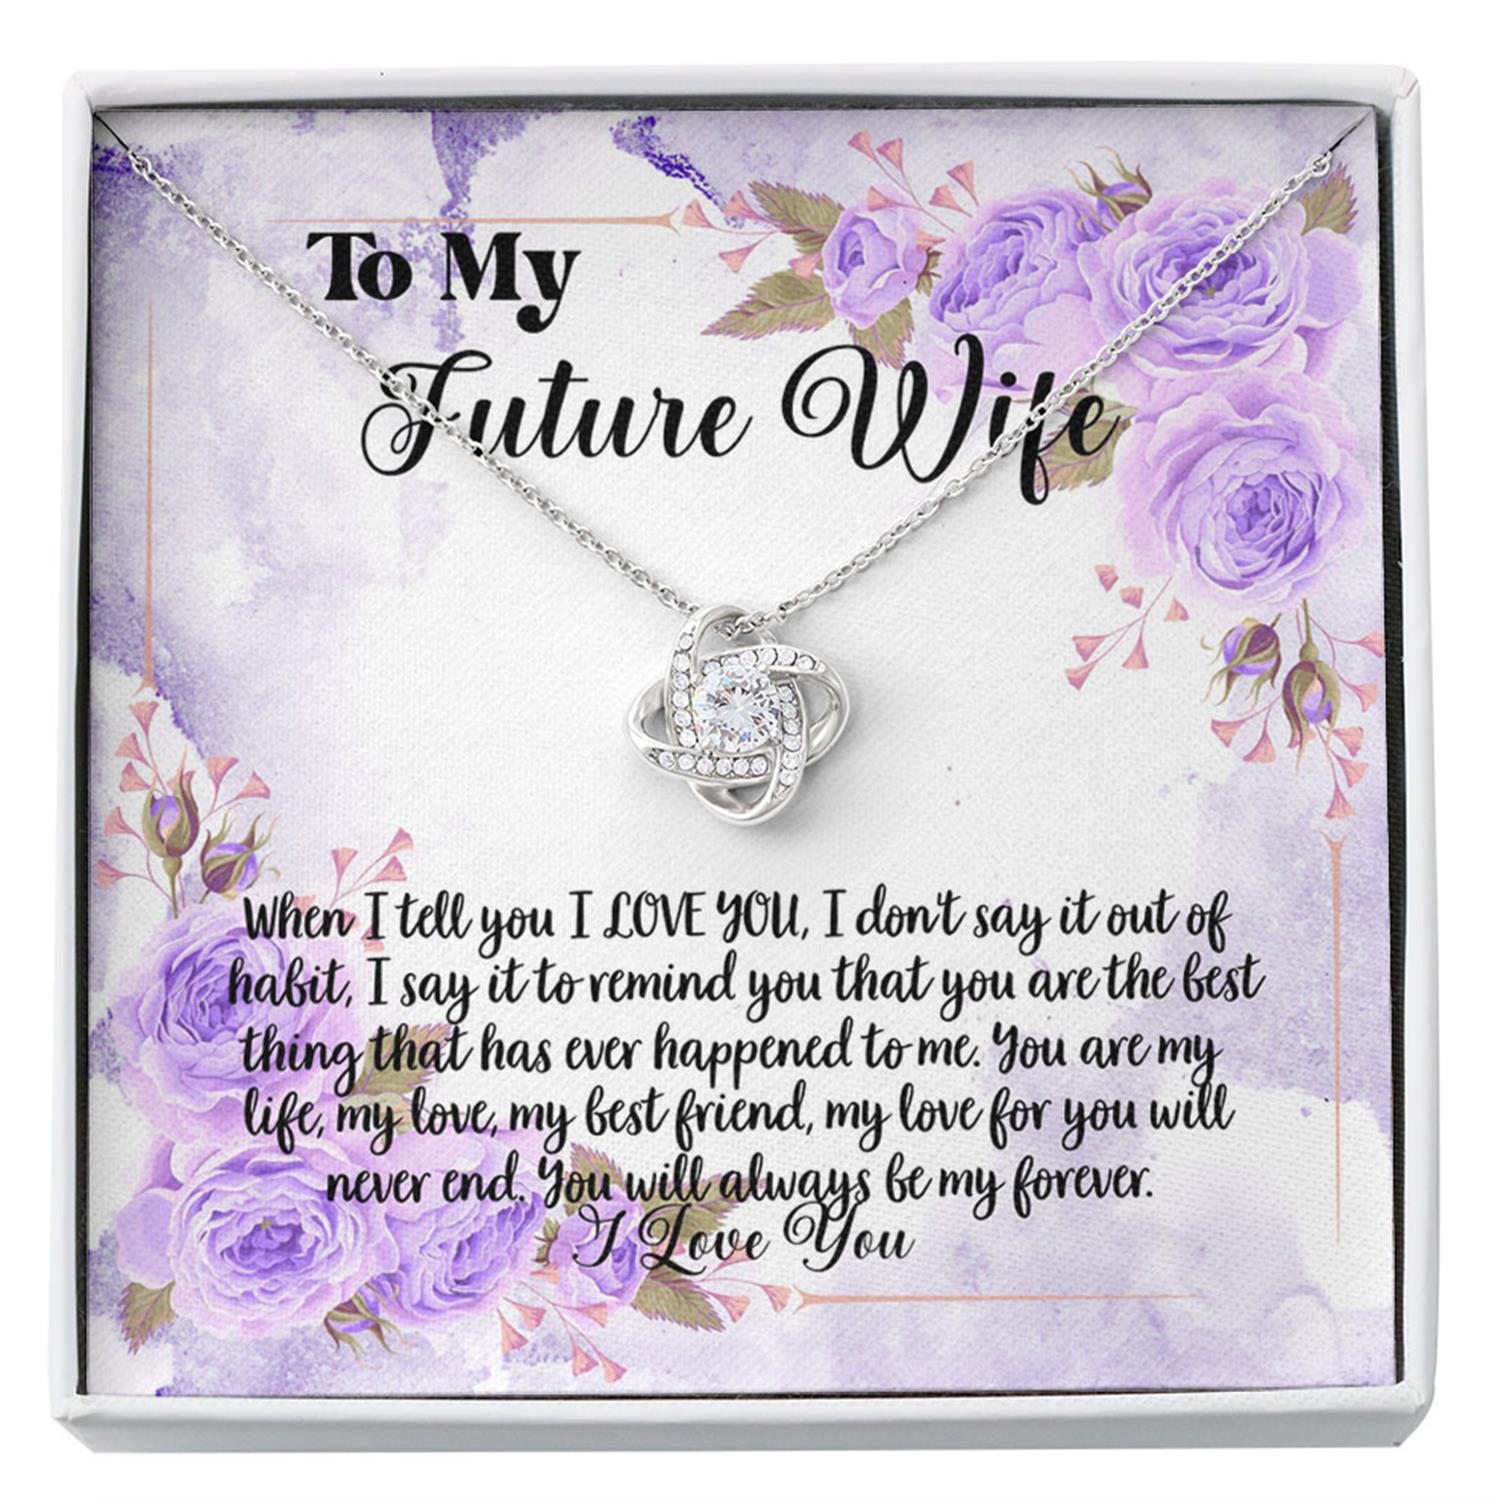 Future Wife Necklace, To My Future Wife Necklace Gift, Necklace For Fianc�e, Necklace For Her Anniversary, Gift For Her, Gift For Engaged Custom Necklace